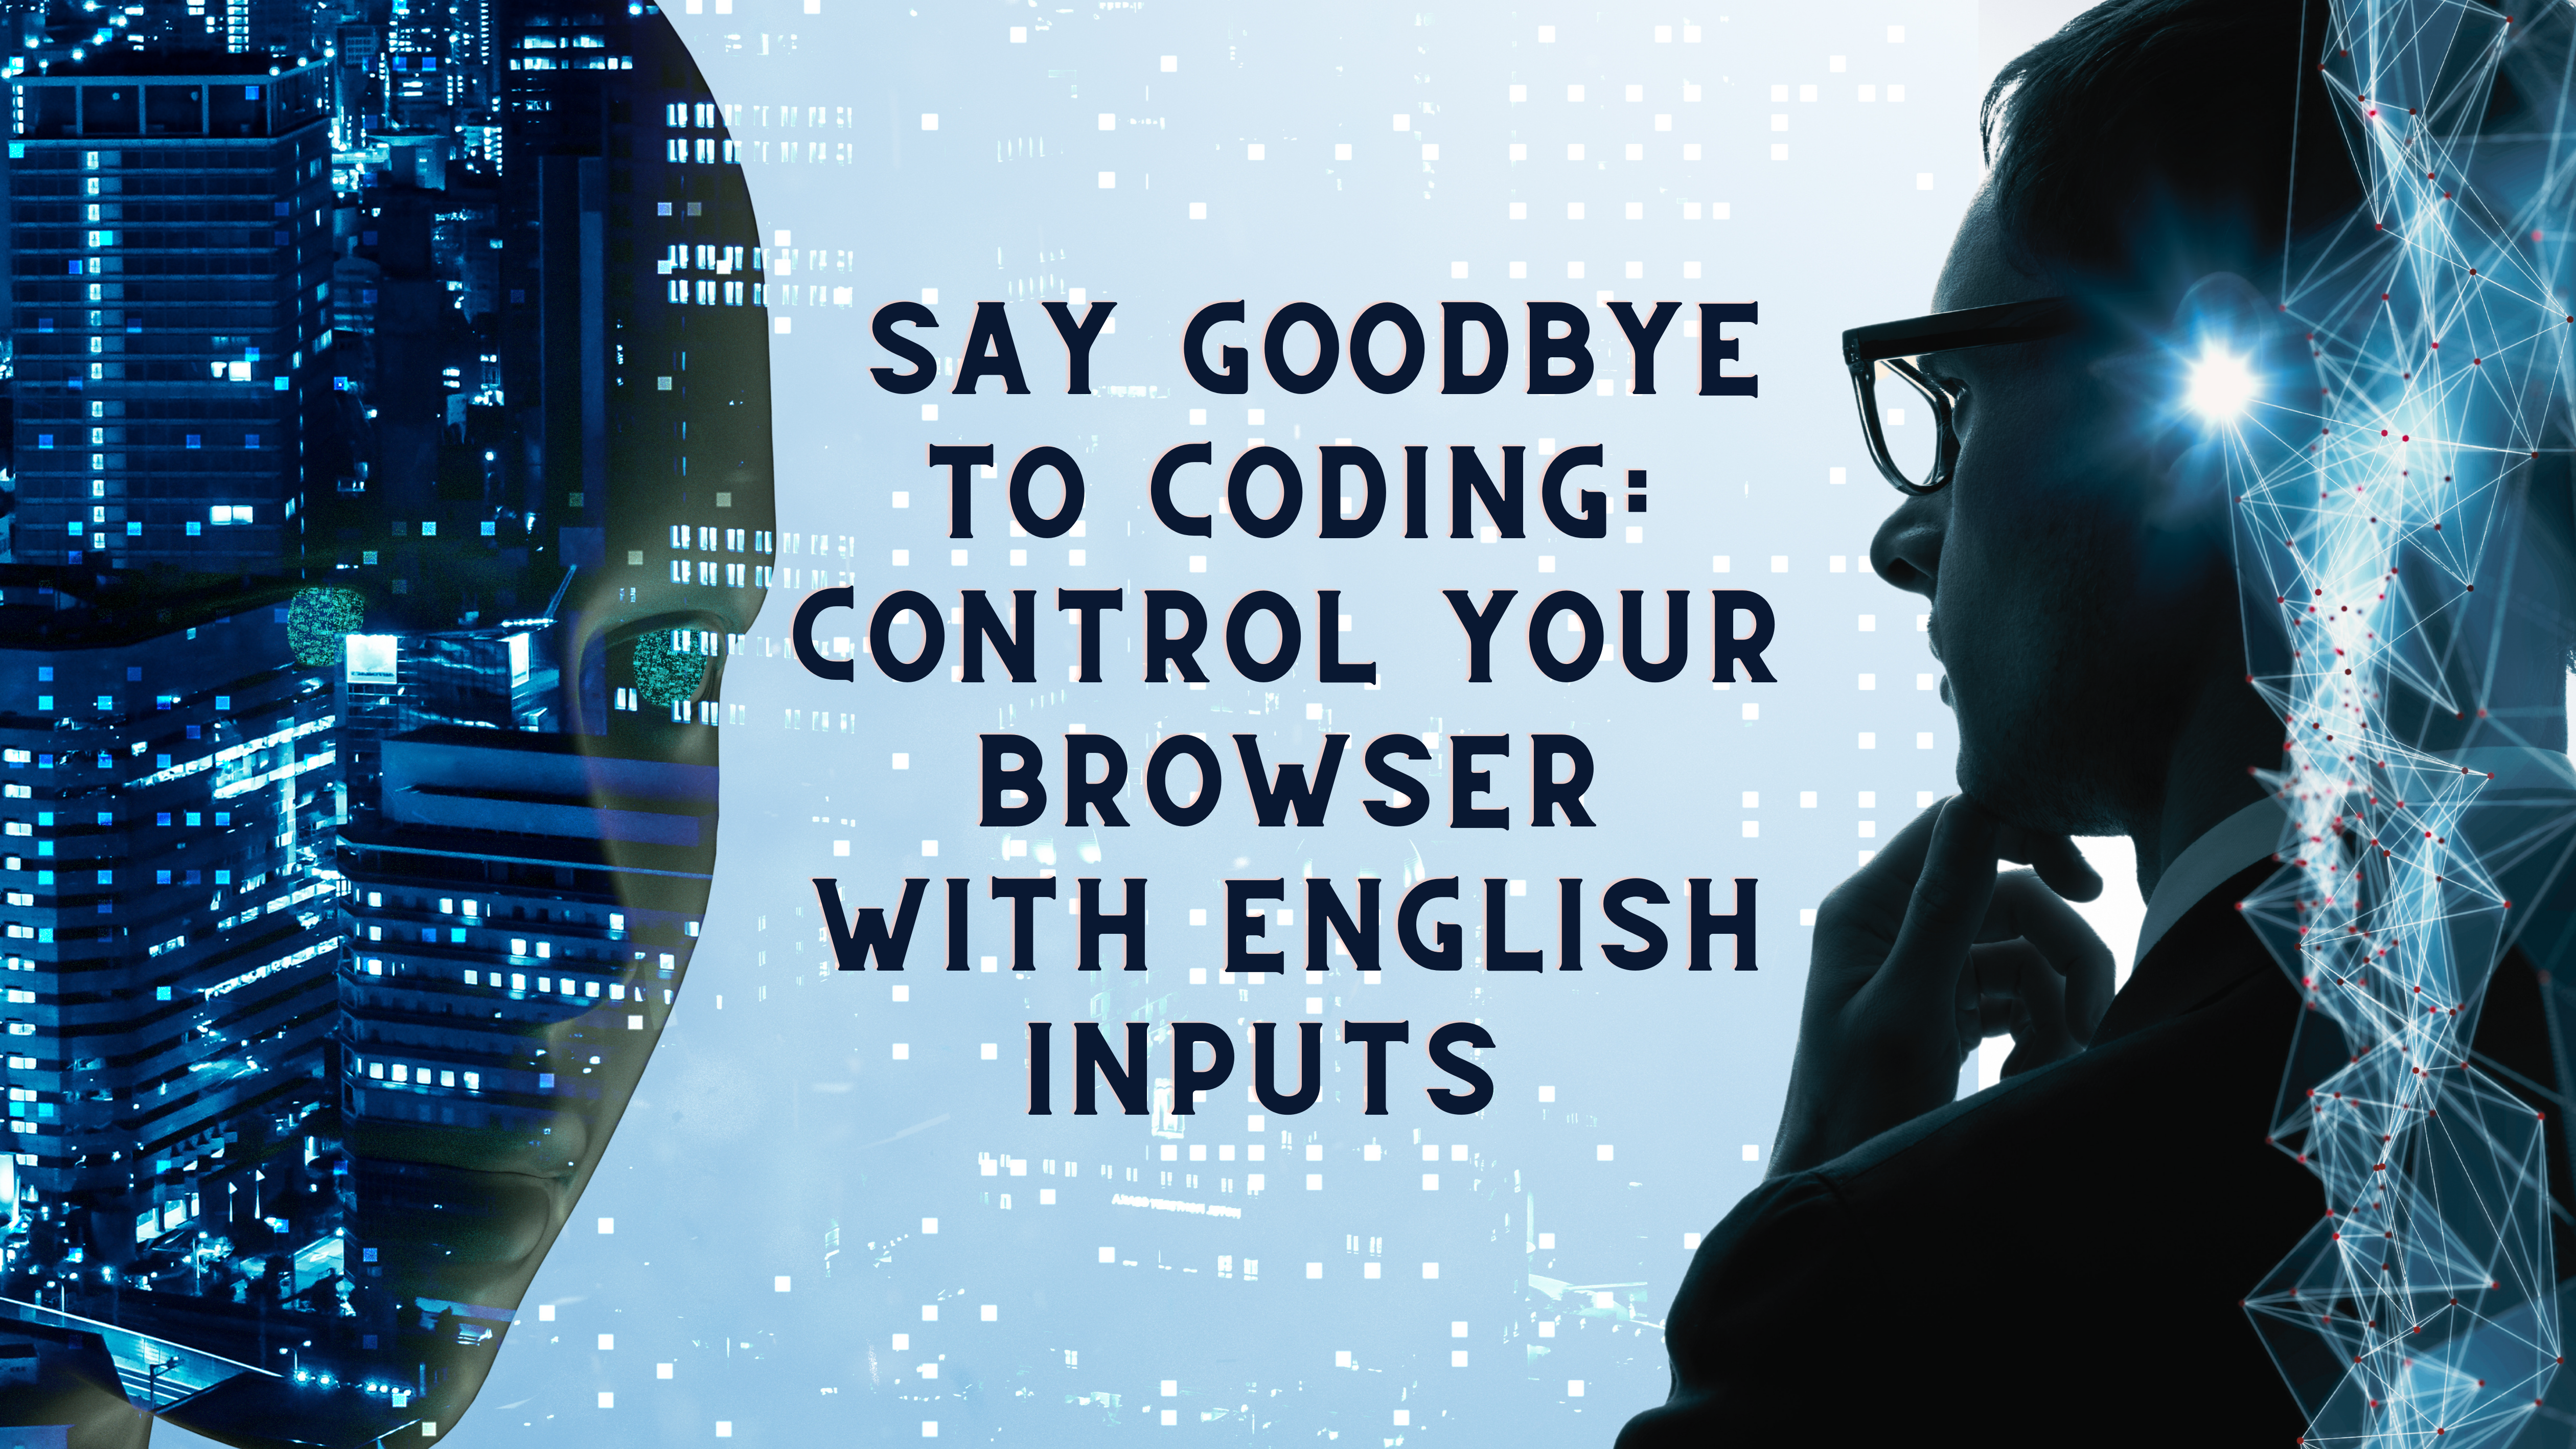 “Say Goodbye to Coding: Control Your Browser with English Inputs”